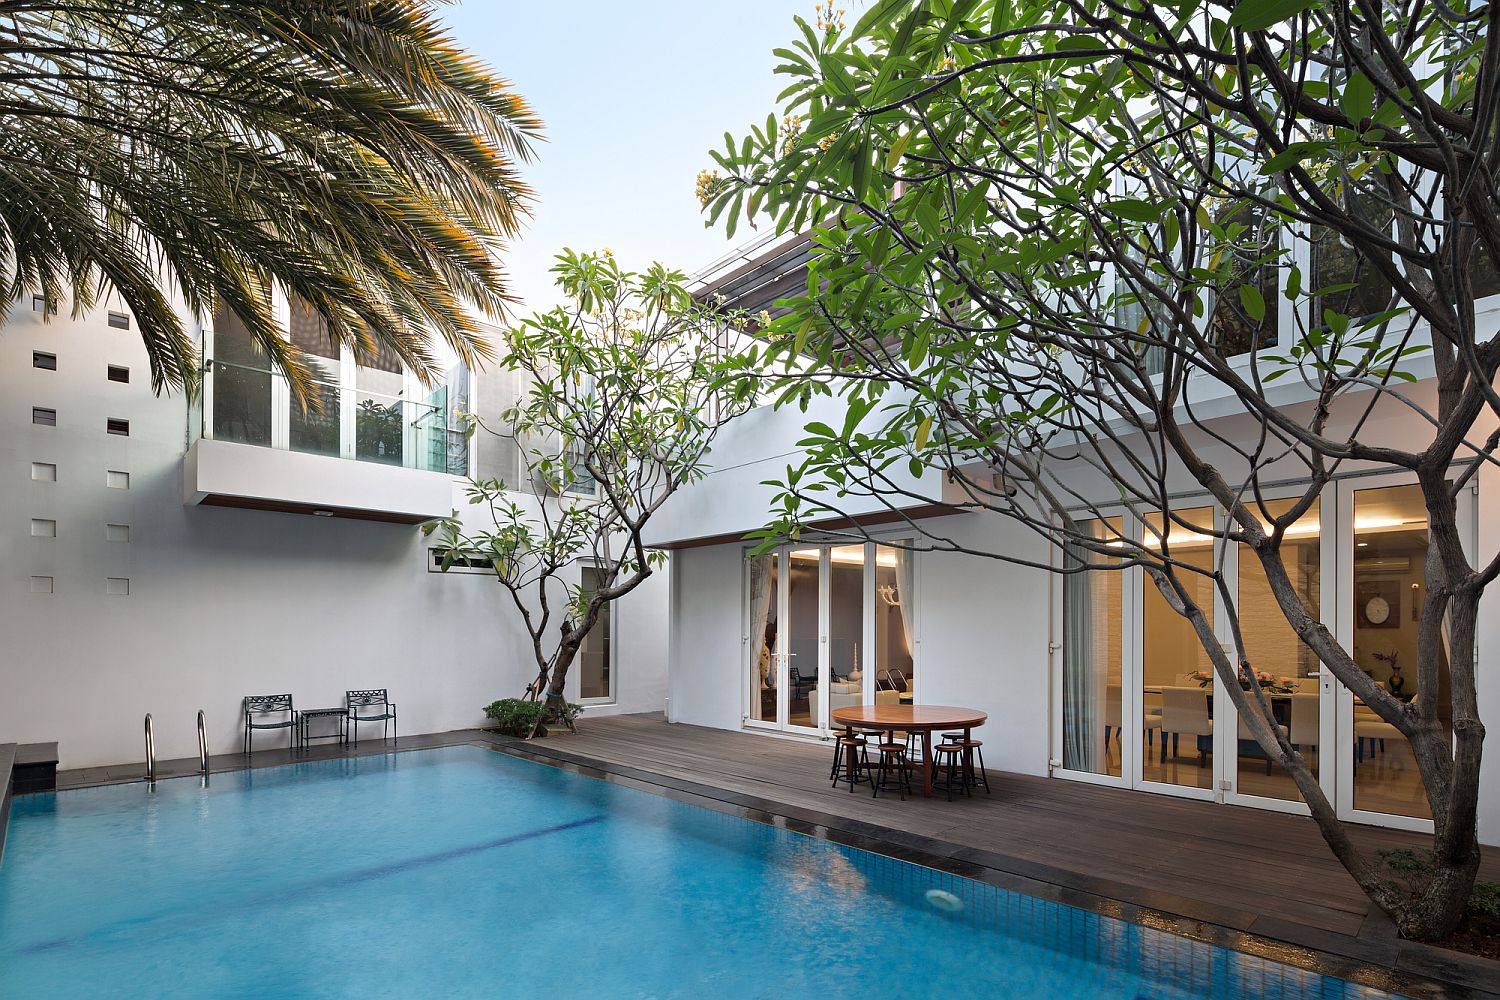 Designing-two-houses-on-the-same-lot-with-common-pool-and-courtyard